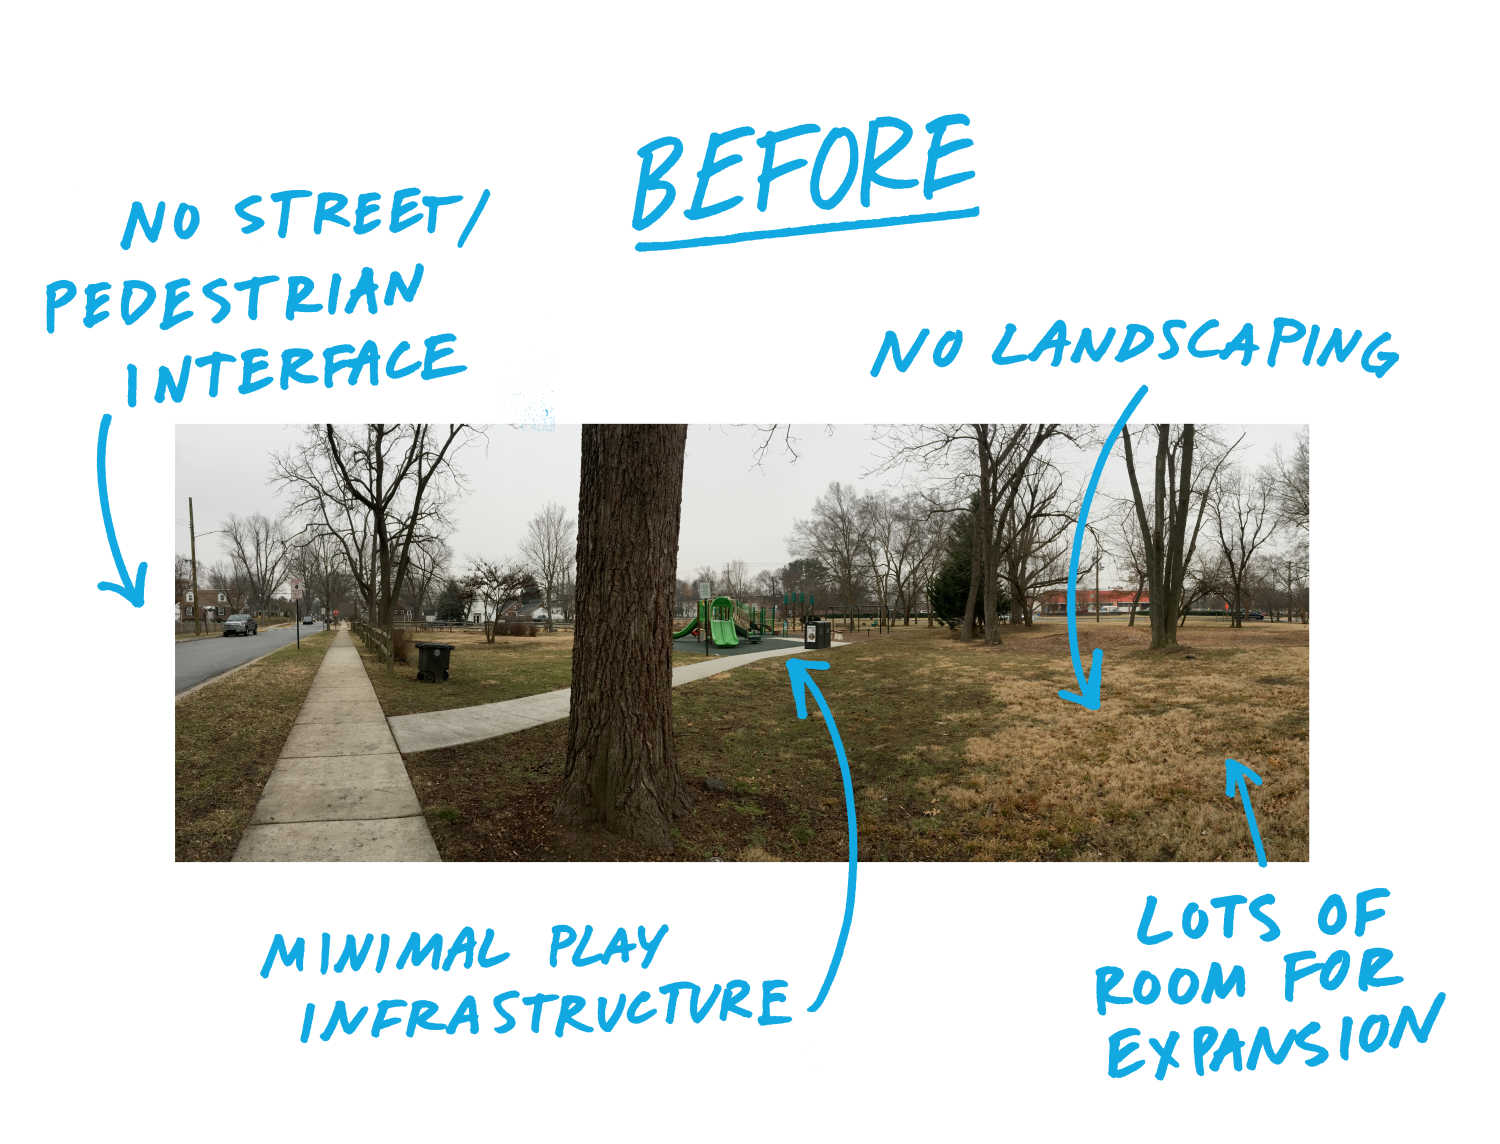 Before: No pedestrian or street access, no landscaping, minimal play infrastructure, lots of room for expansion. 